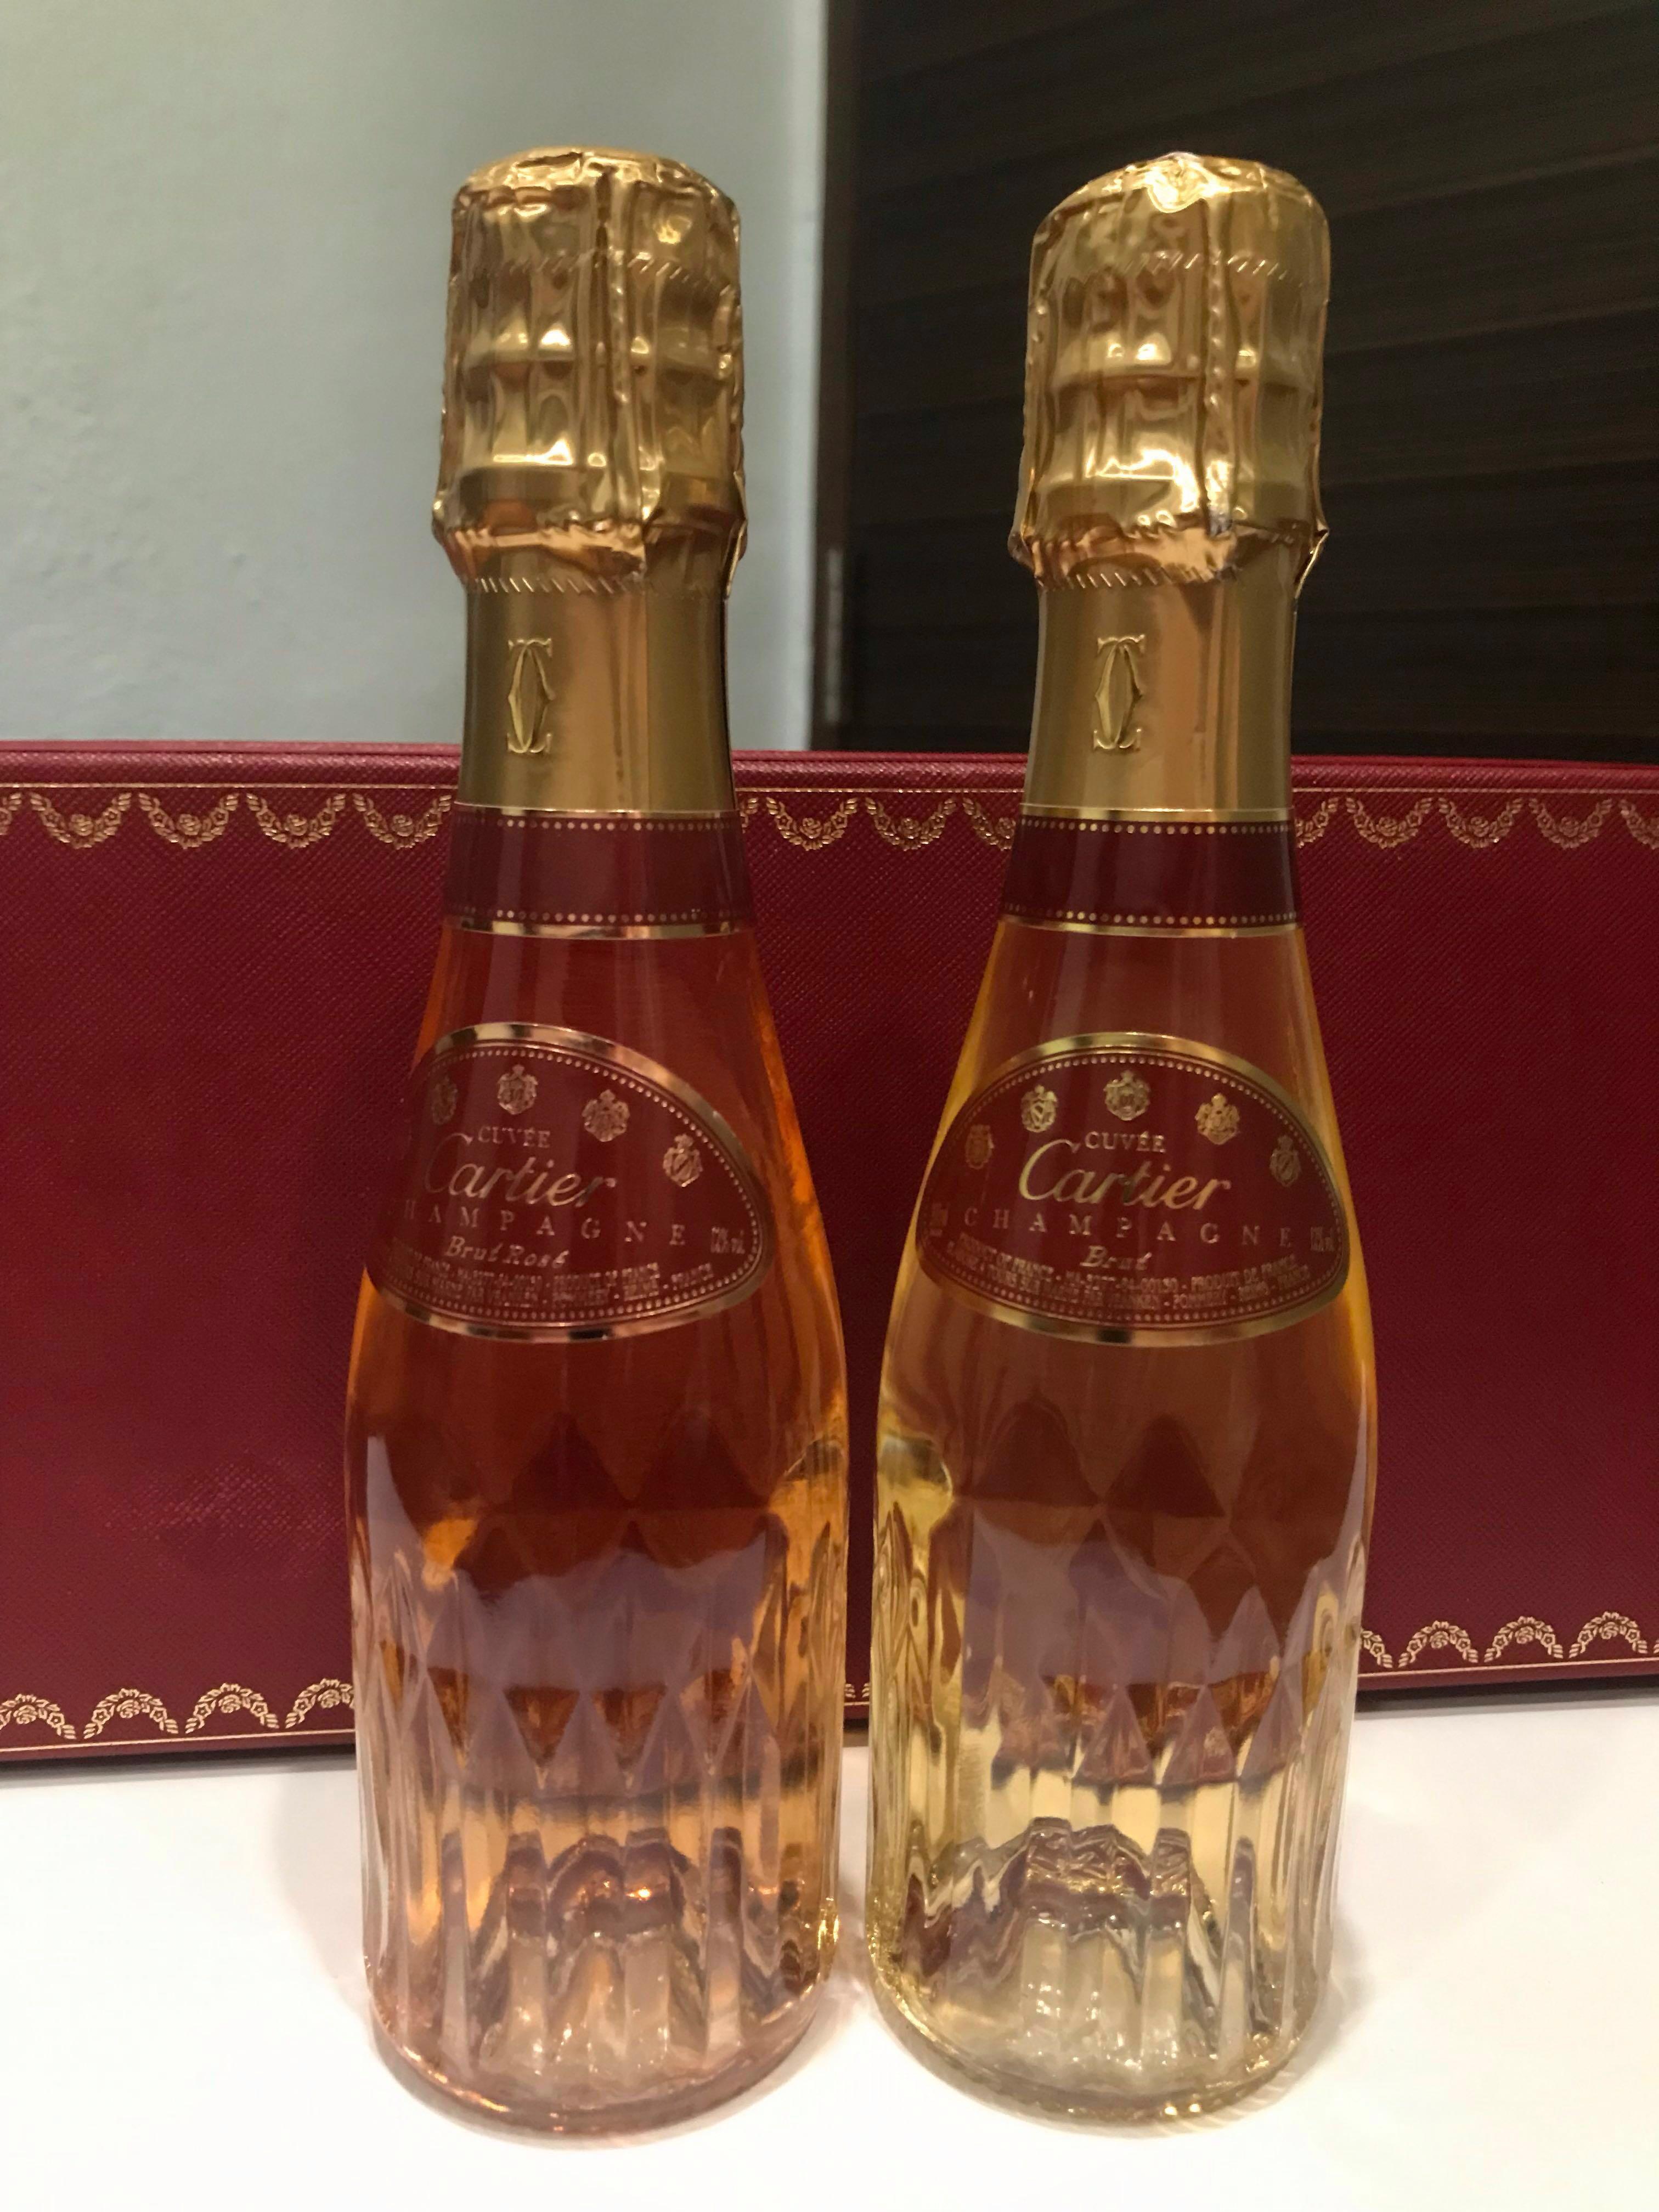 champagne cartier